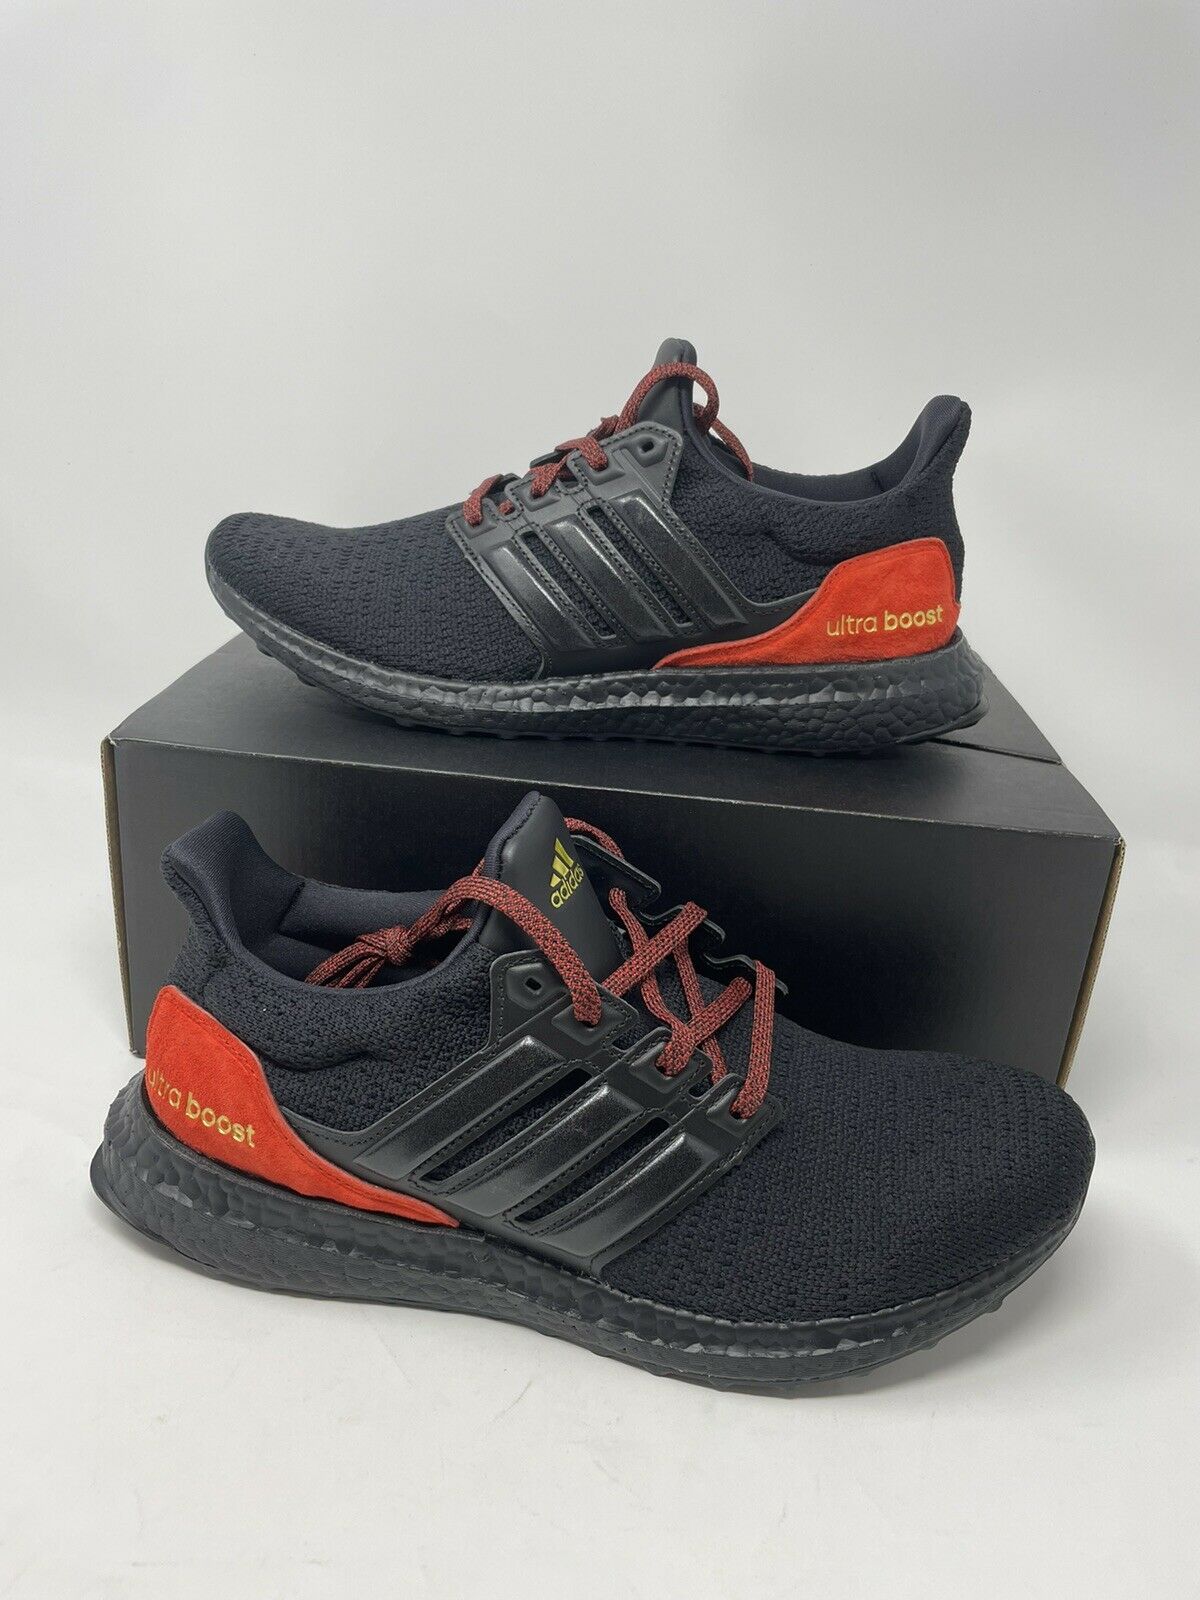 NEW Adidas UltraBoost DNA Shoes FW4899, Black / Black-Red - Men’s Size 8